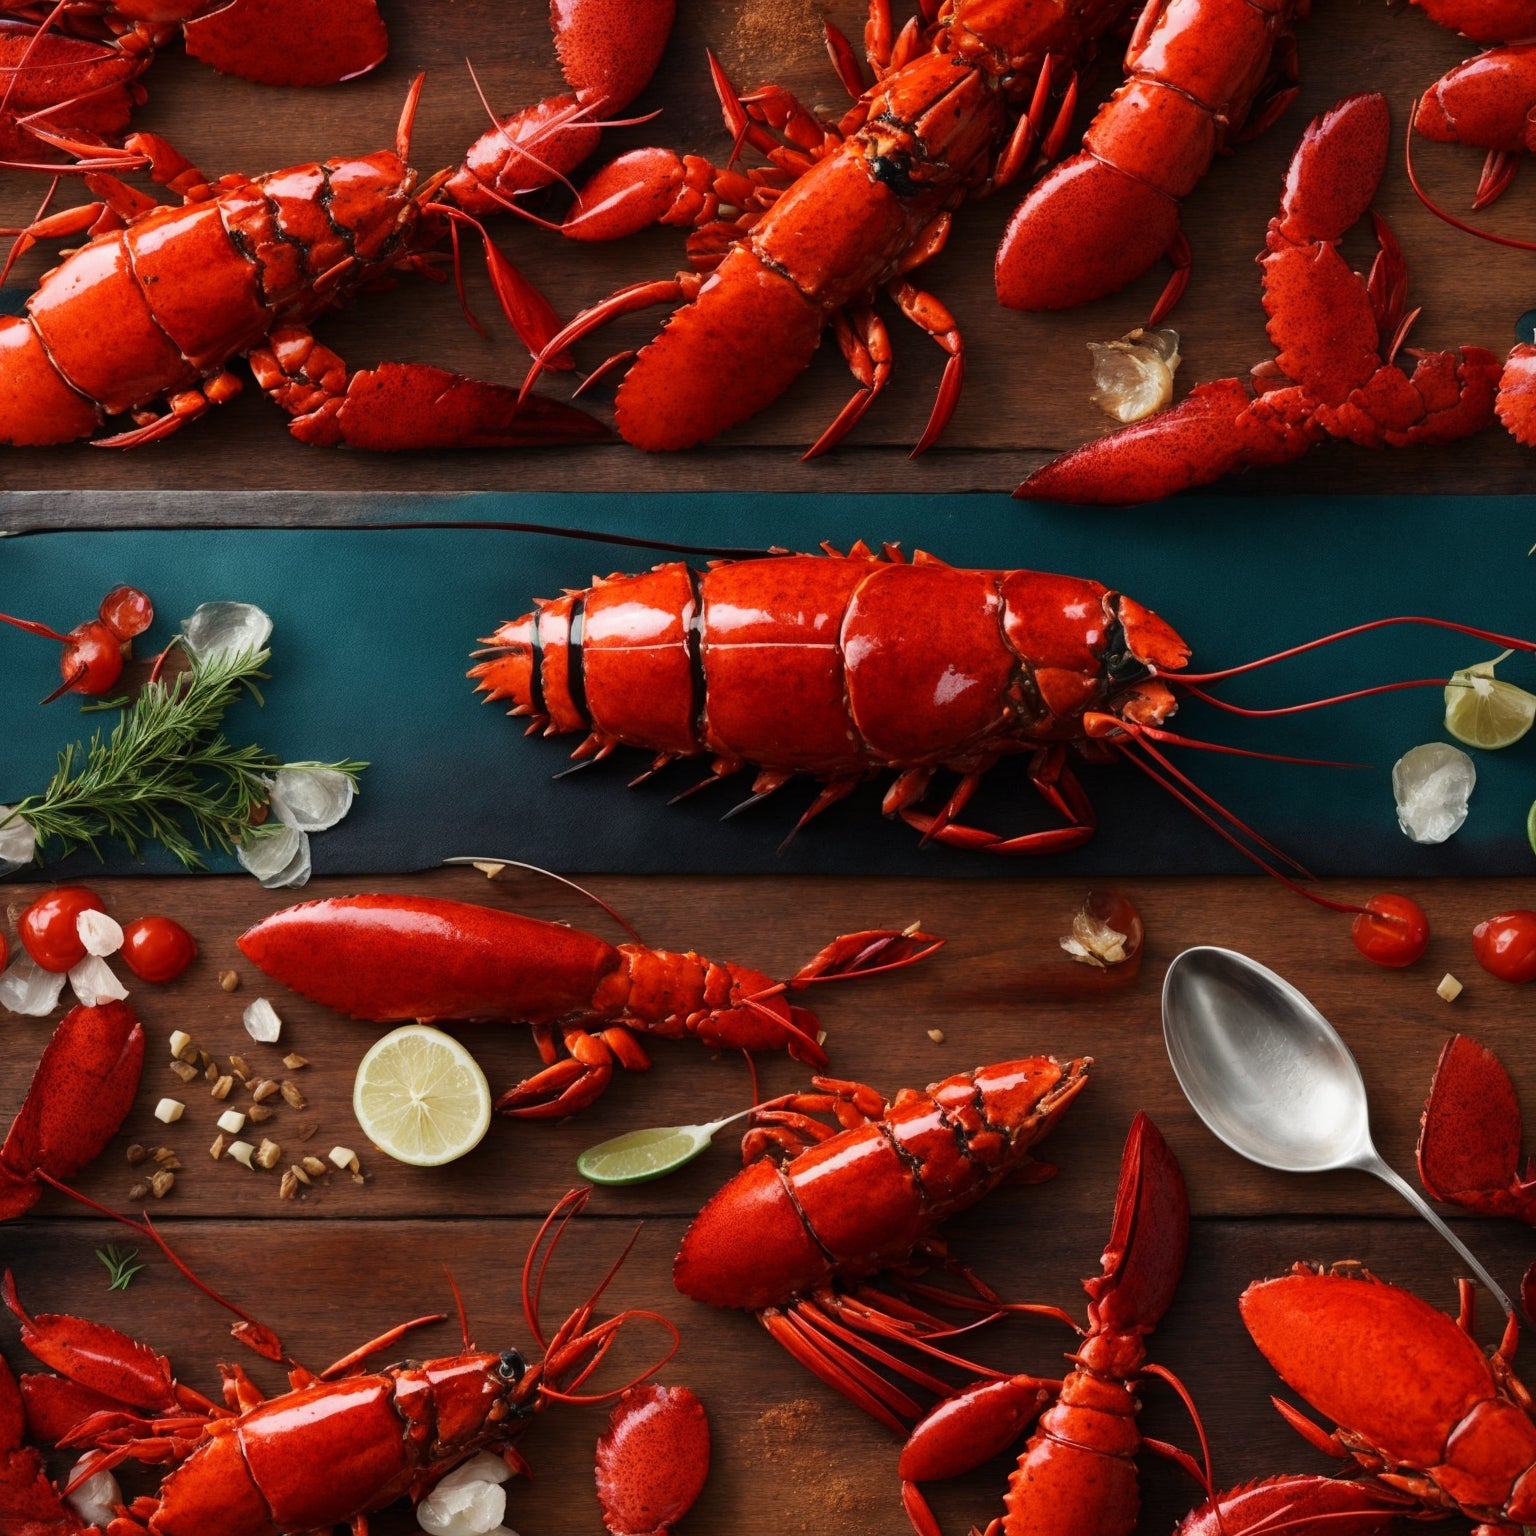 Culinary Delight Awaits: Explore Global Seafoods' Live Lobsters - Global Seafoods North America